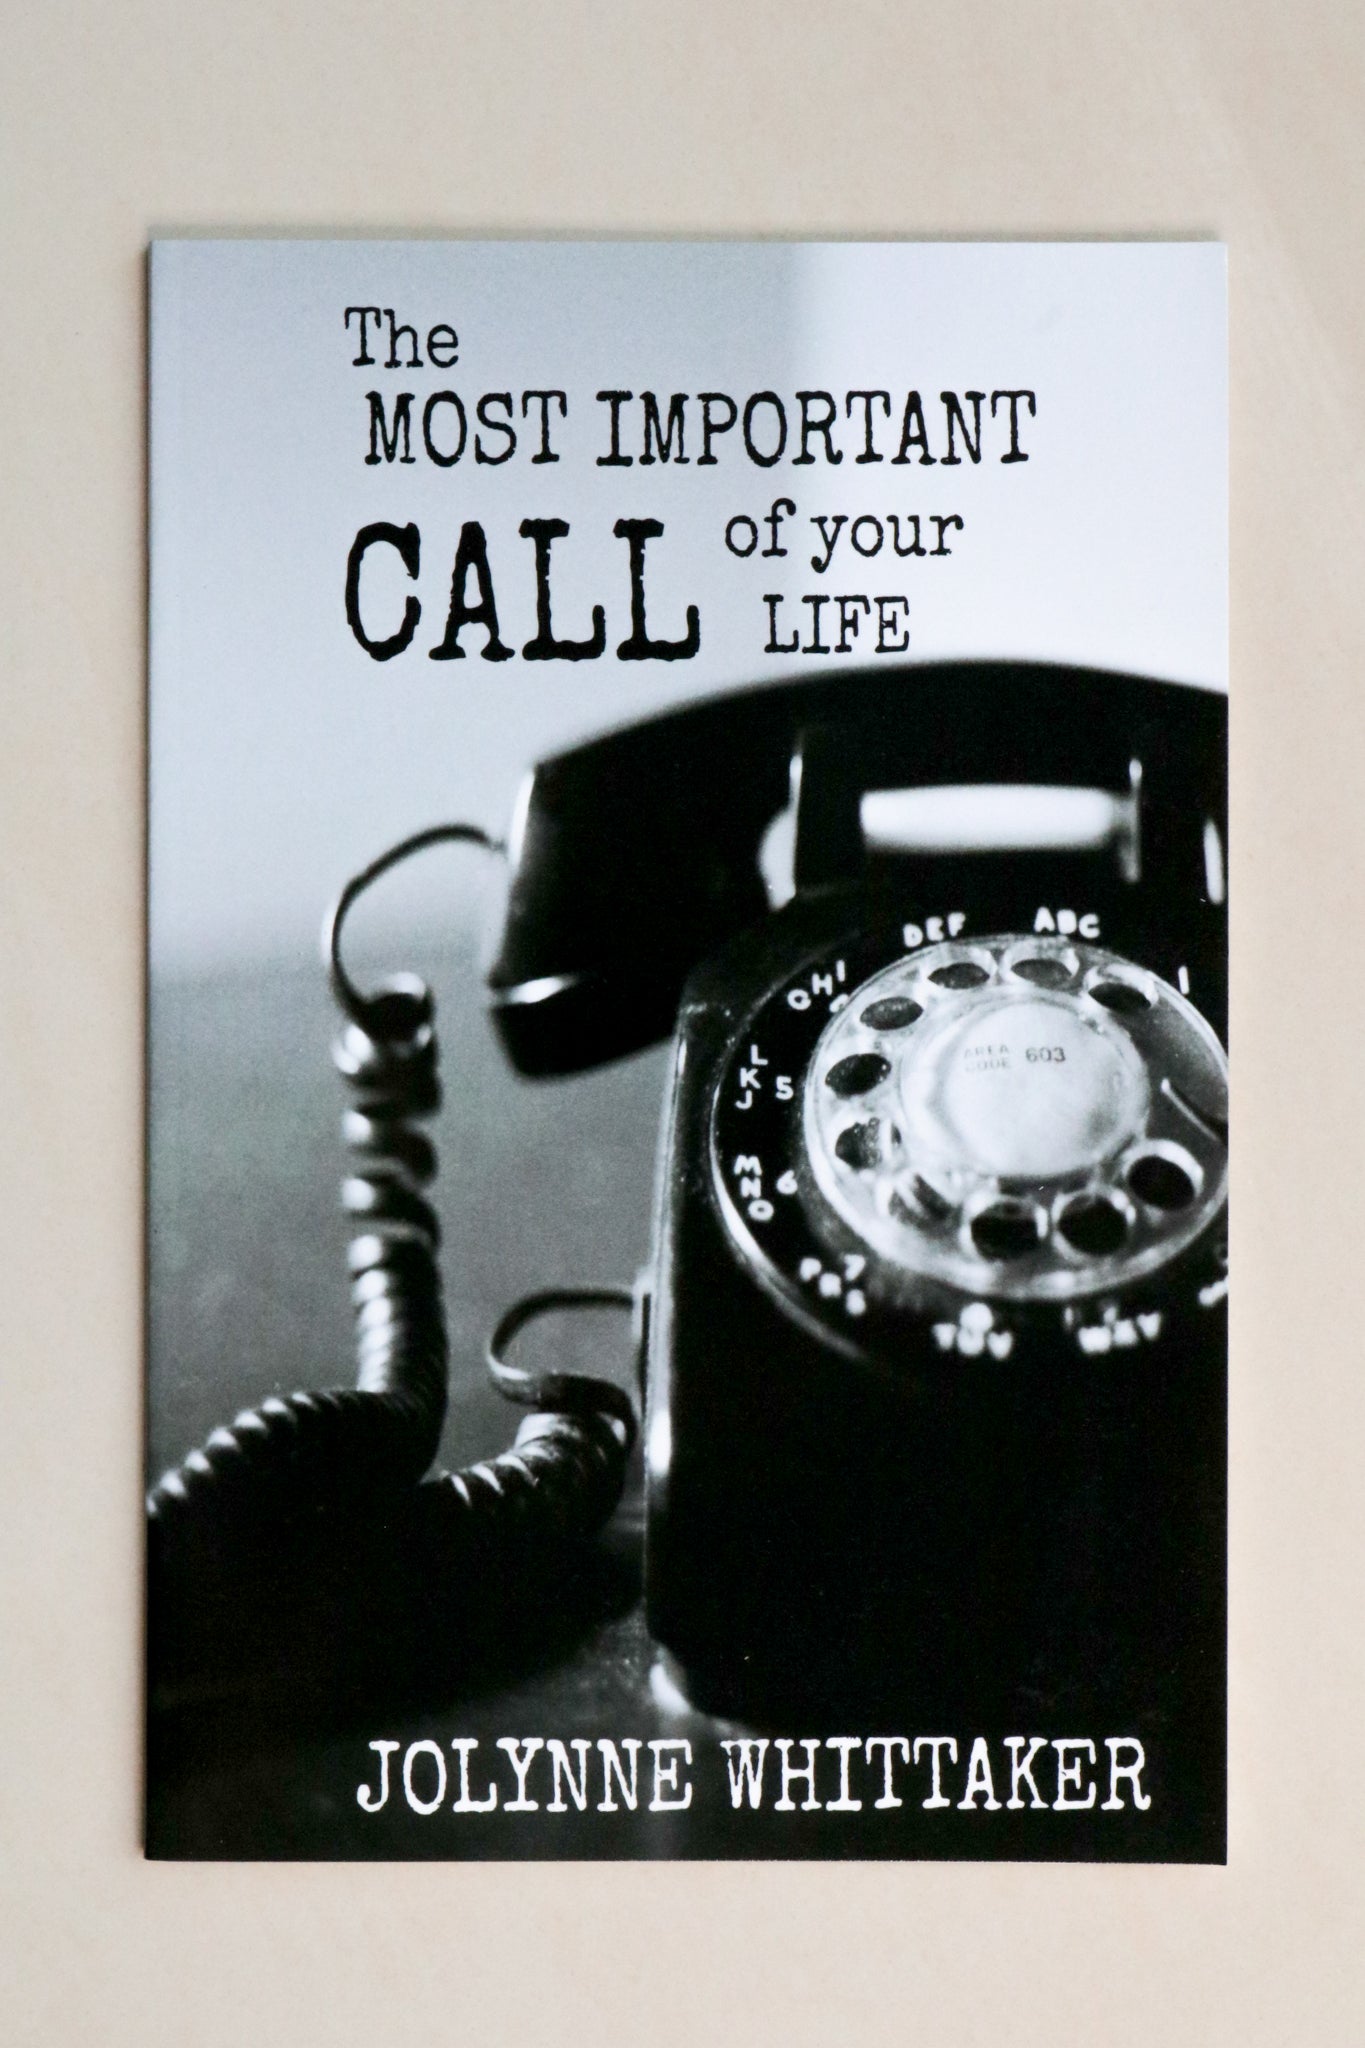 THE MOST IMPORTANT CALL OF YOUR LIFE